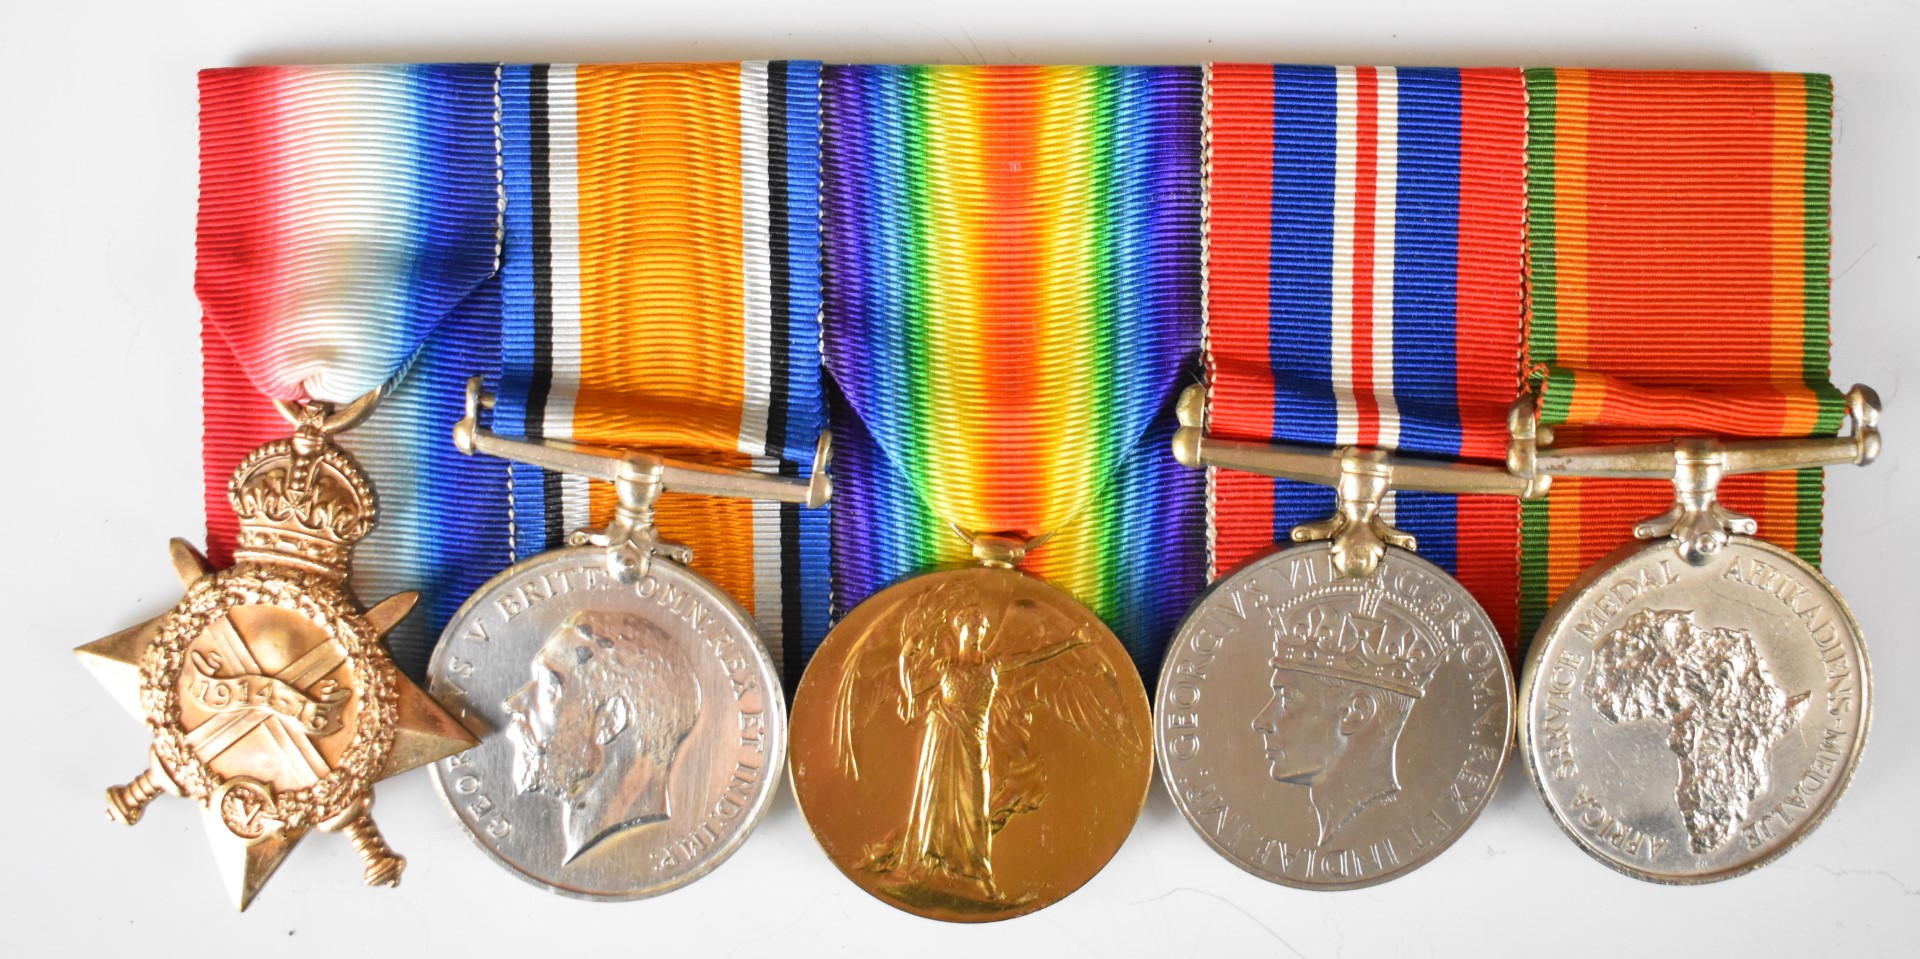 South Africa WW1 and WW2 medal group of five comprising 1914/1915 Star, WW1 War Medal, Victory